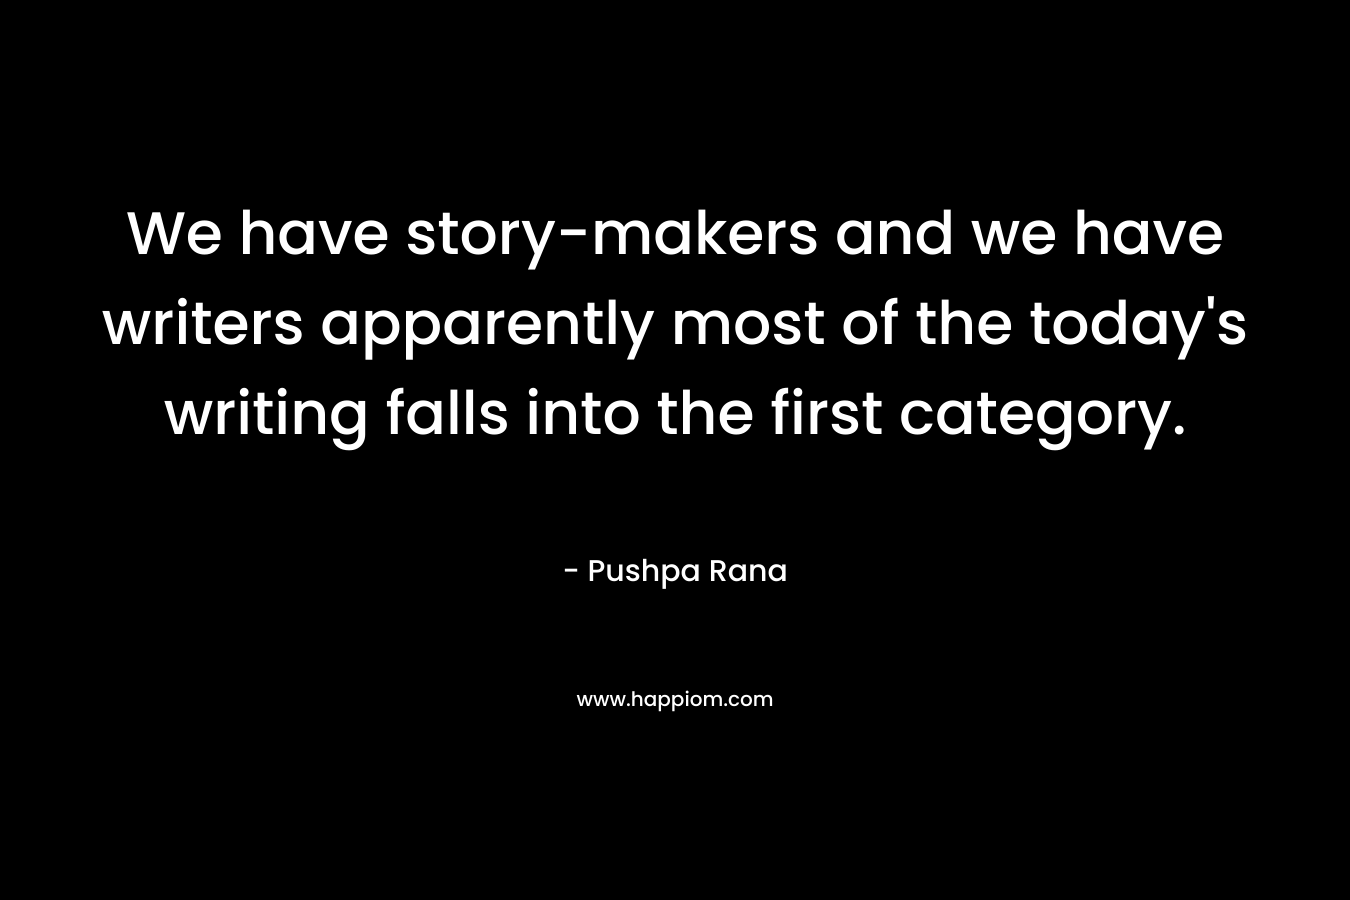 We have story-makers and we have writers apparently most of the today’s writing falls into the first category. – Pushpa Rana